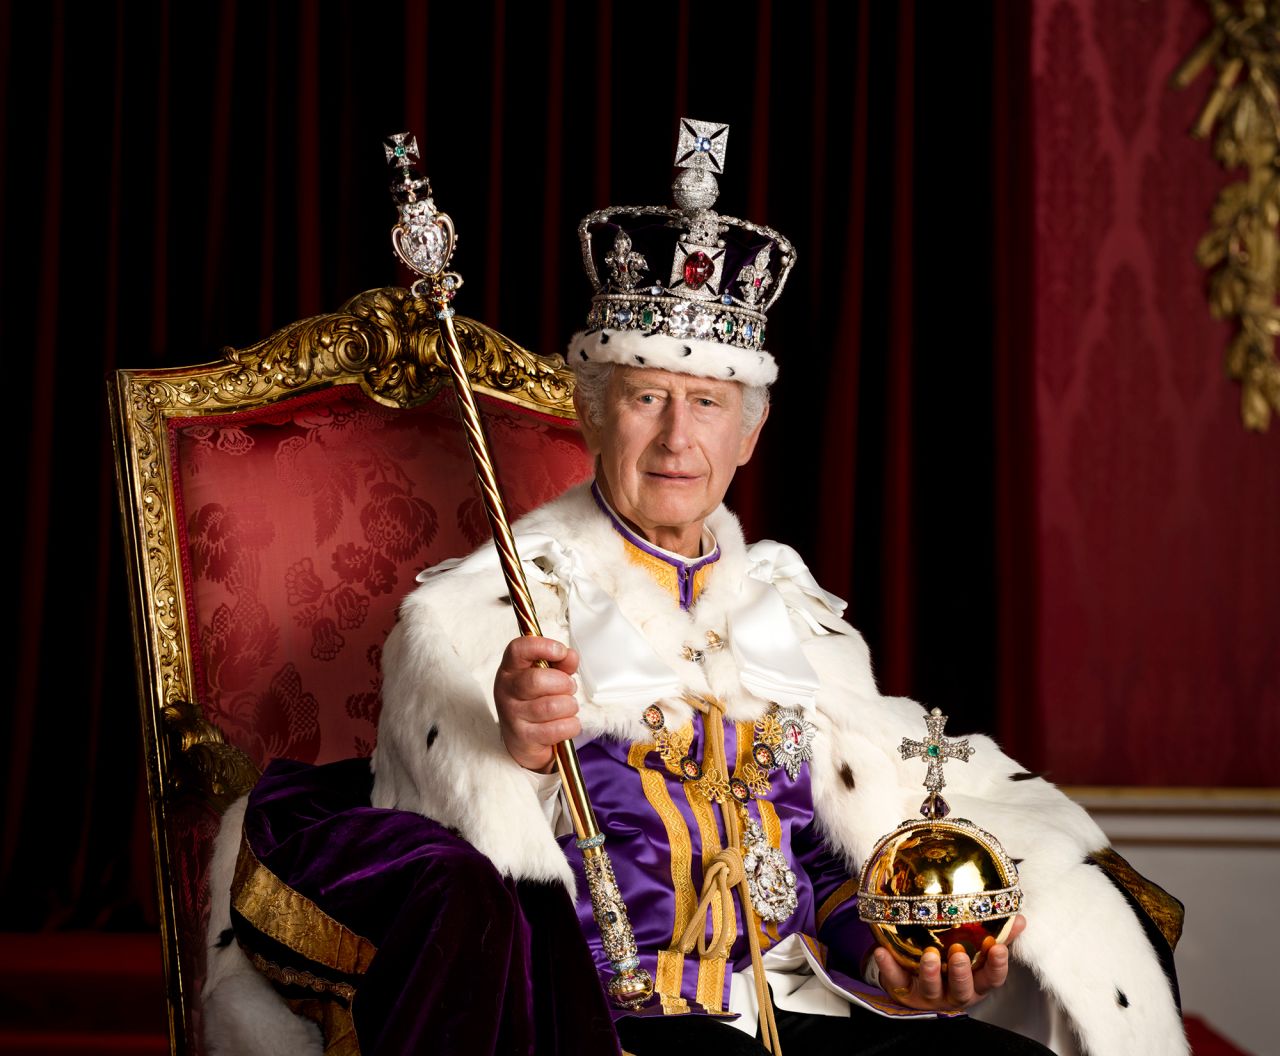 Britain's King Charles III <a href="https://www.cnn.com/2023/05/08/uk/coronation-official-portraits-intl-gbr-ckc/index.html" target="_blank">poses for a portrait</a> in Buckingham Palace's Throne Room dressed in full regalia. He is wearing the Robe of Estate and the Imperial State Crown while holding the Sovereign's Orb and the Sovereign's Sceptre with Cross.